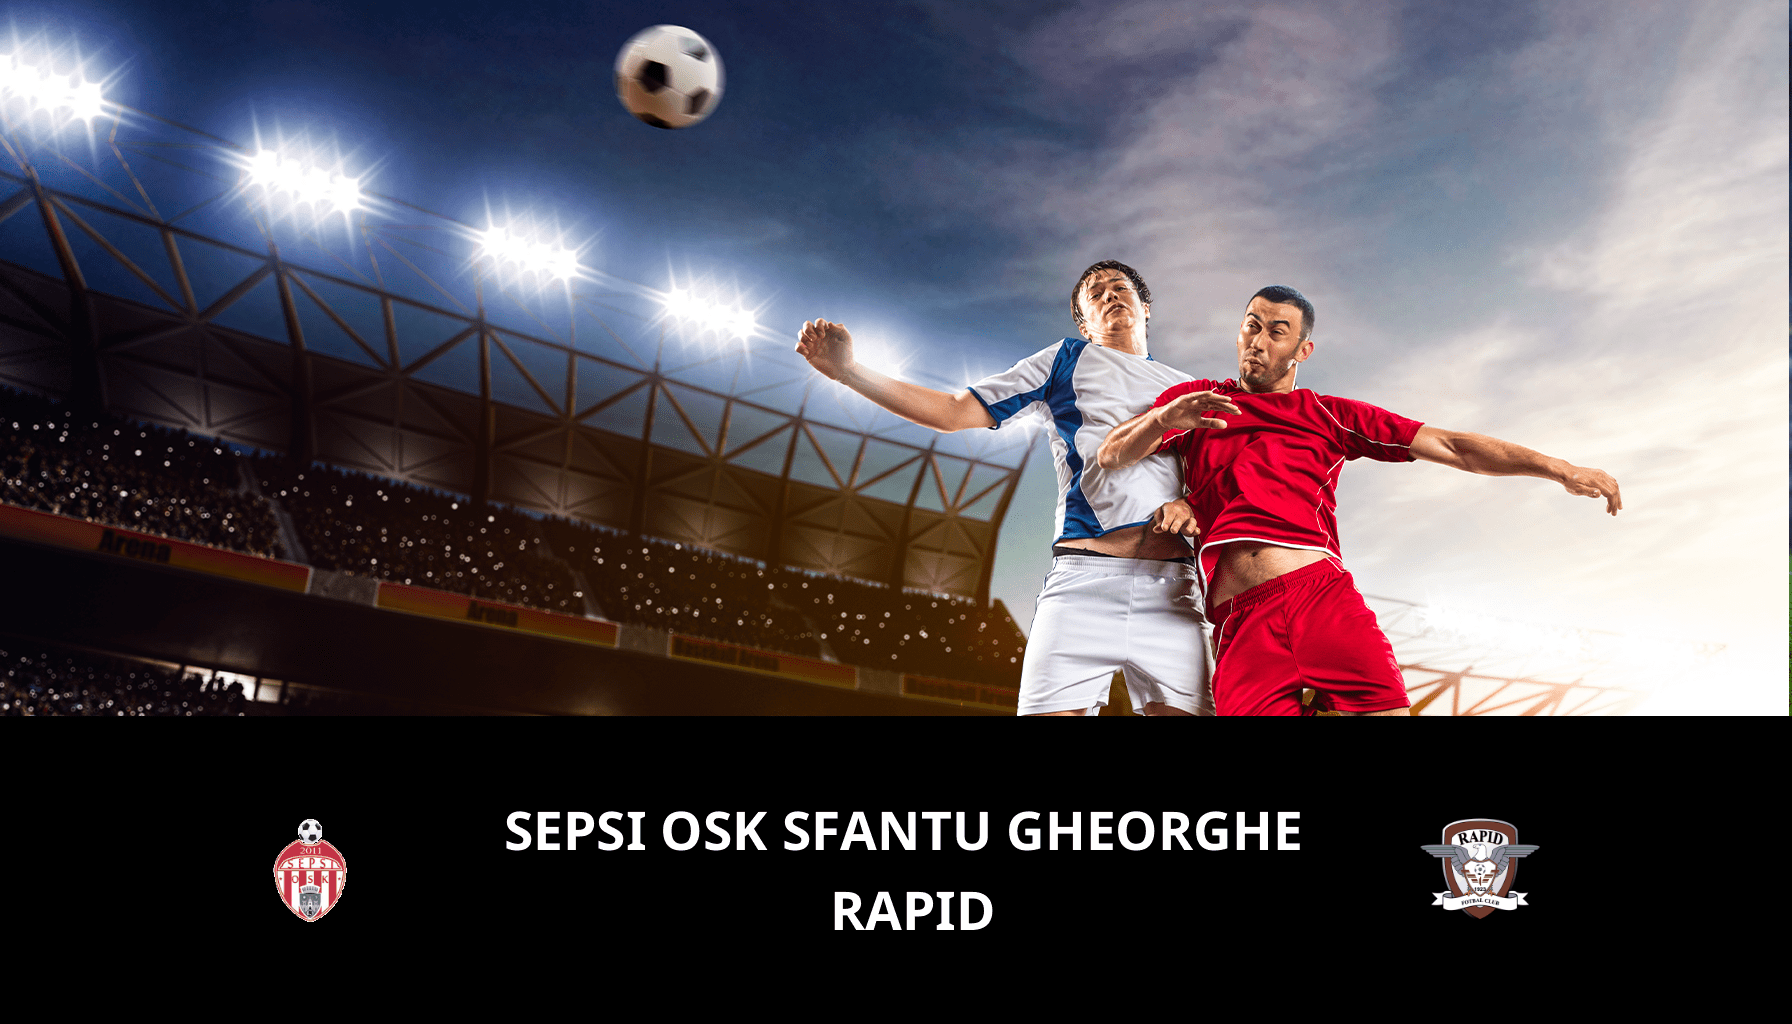 Previsione per Sepsi OSK Sfantu Gheorghe VS Rapid il 10/05/2024 Analysis of the match